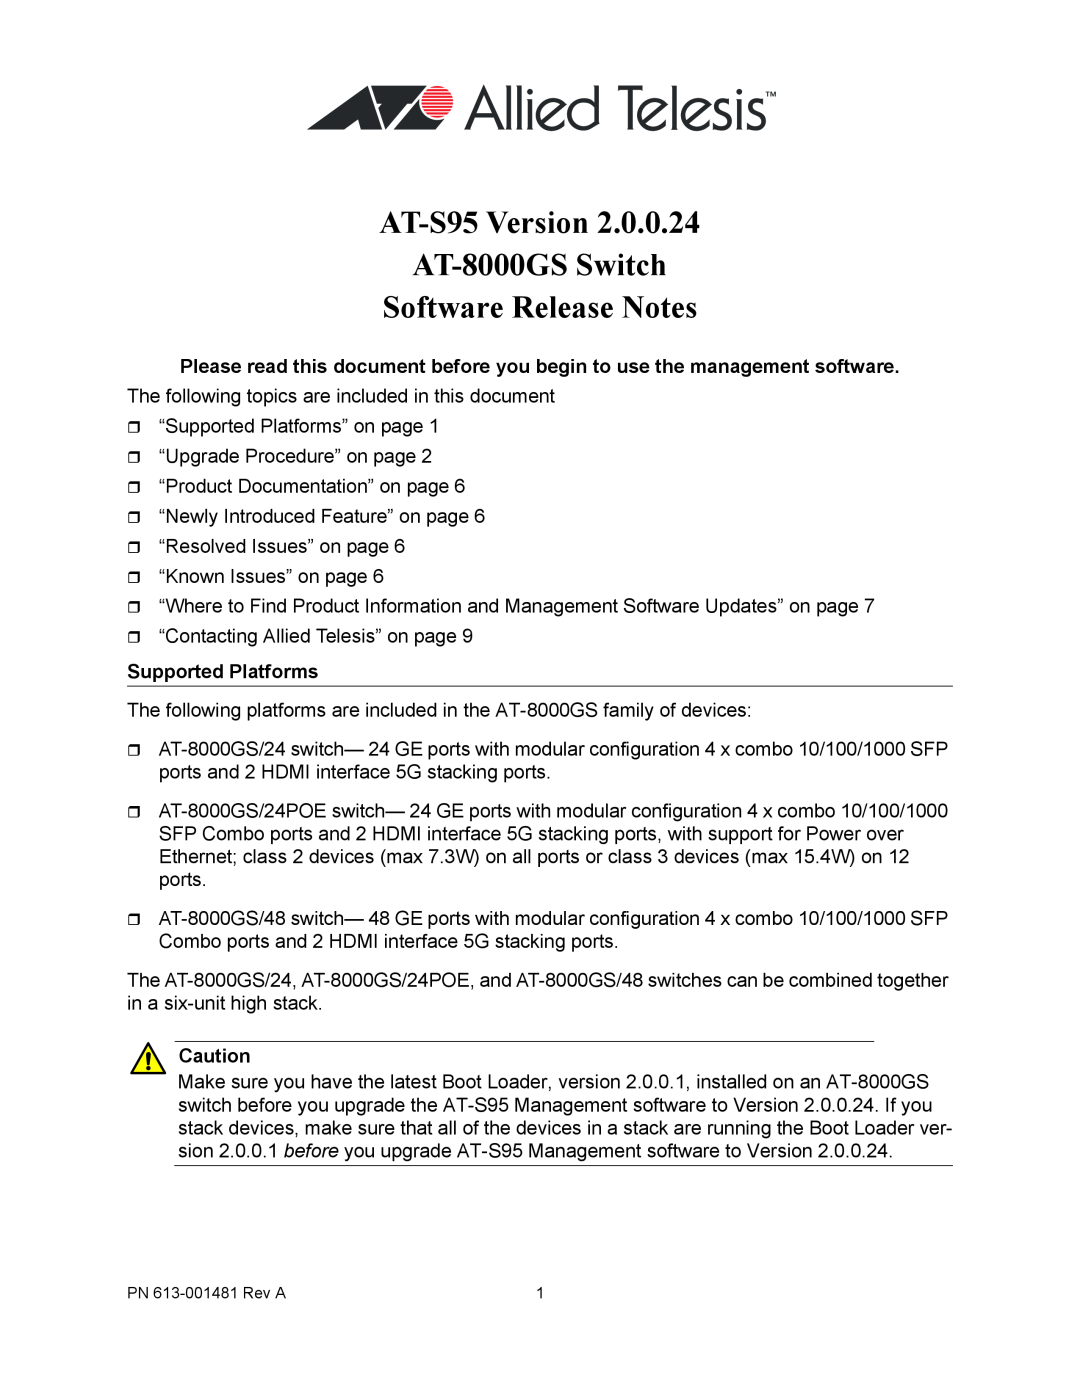 Allied Telesis AT-8000GS/24POE manual Supported Platforms, AT-S95 Version AT-8000GS Switch Software Release Notes 